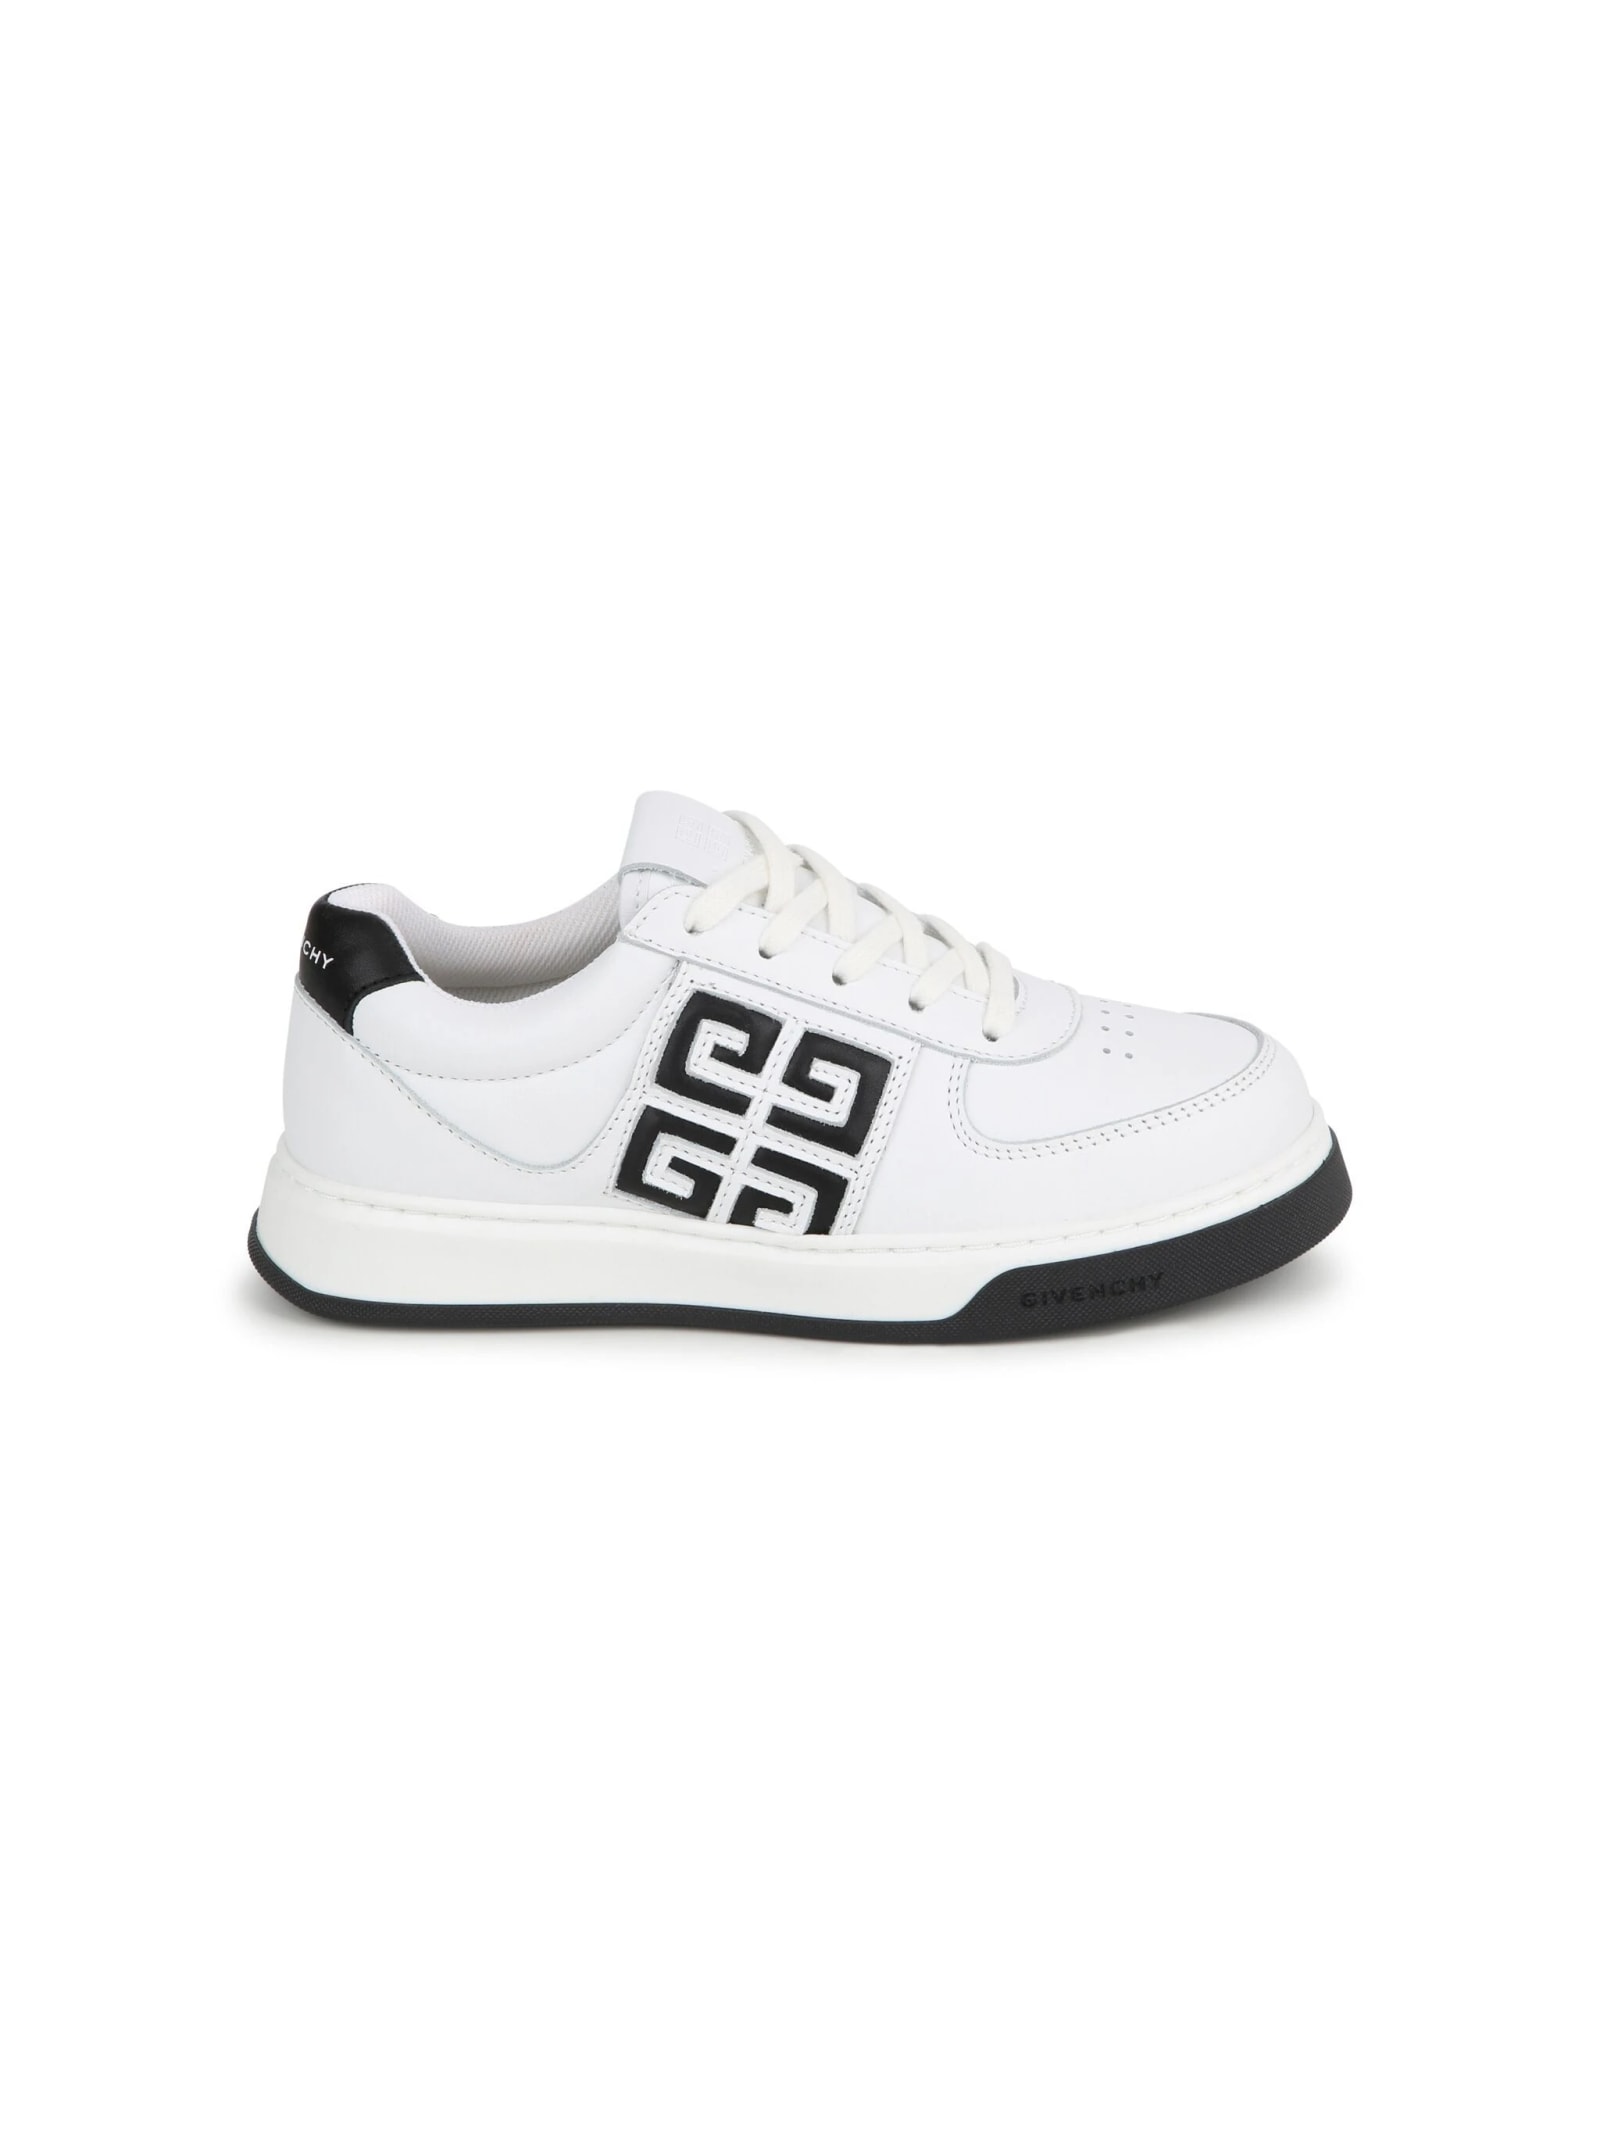 Shop Givenchy G4 Sneakers In White And Black Leather